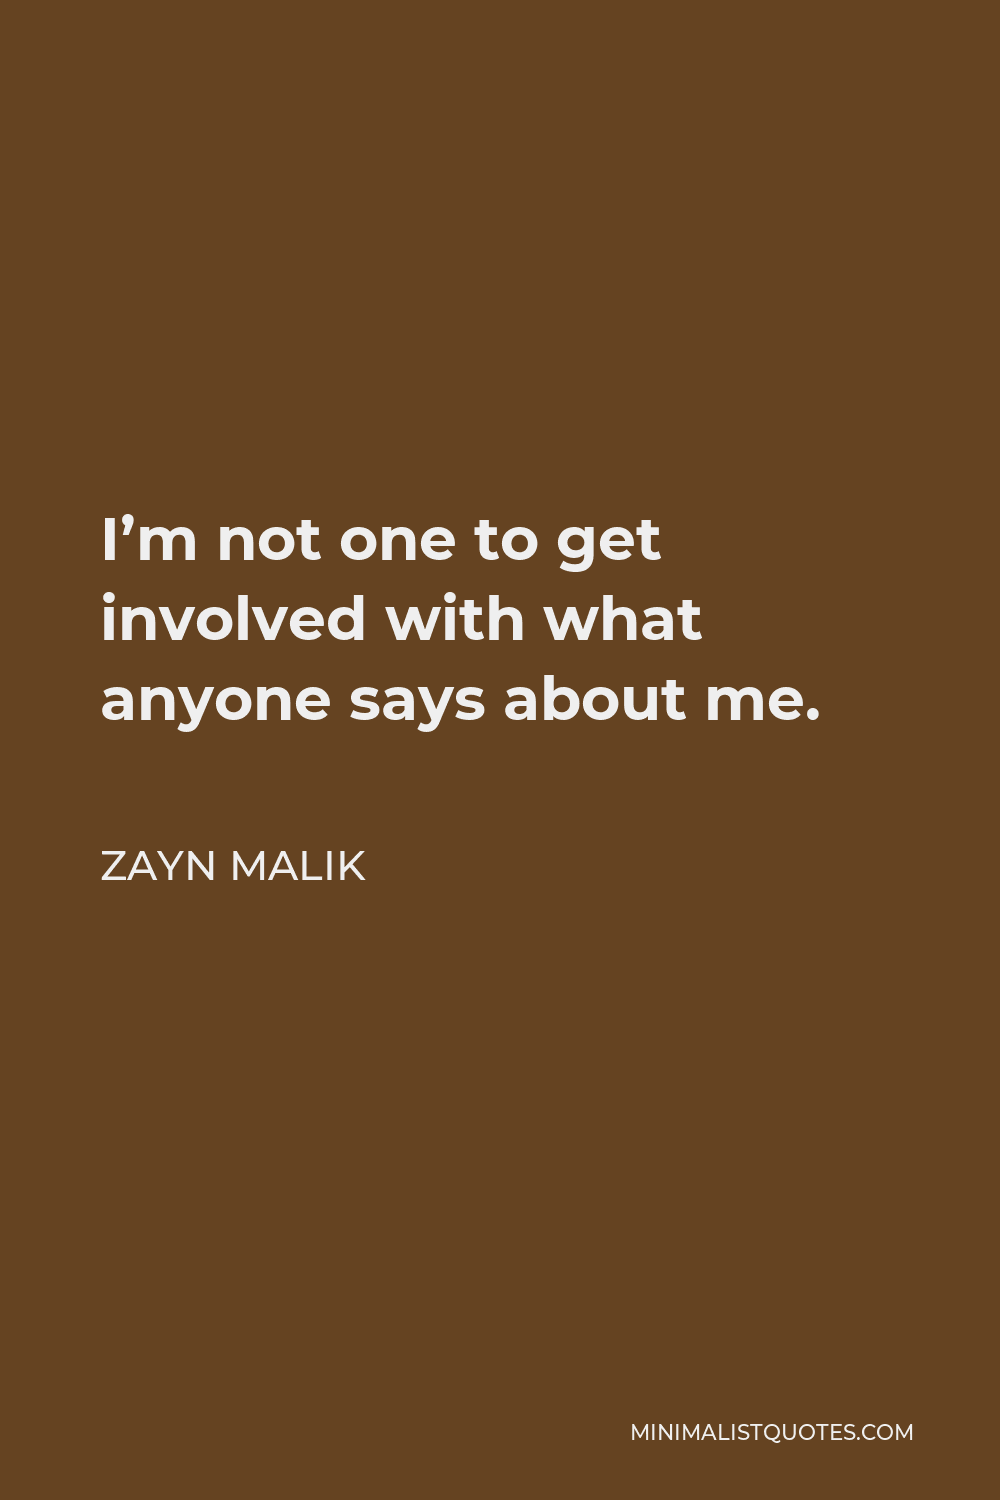 Zayn Malik Quote - I’m not one to get involved with what anyone says about me.